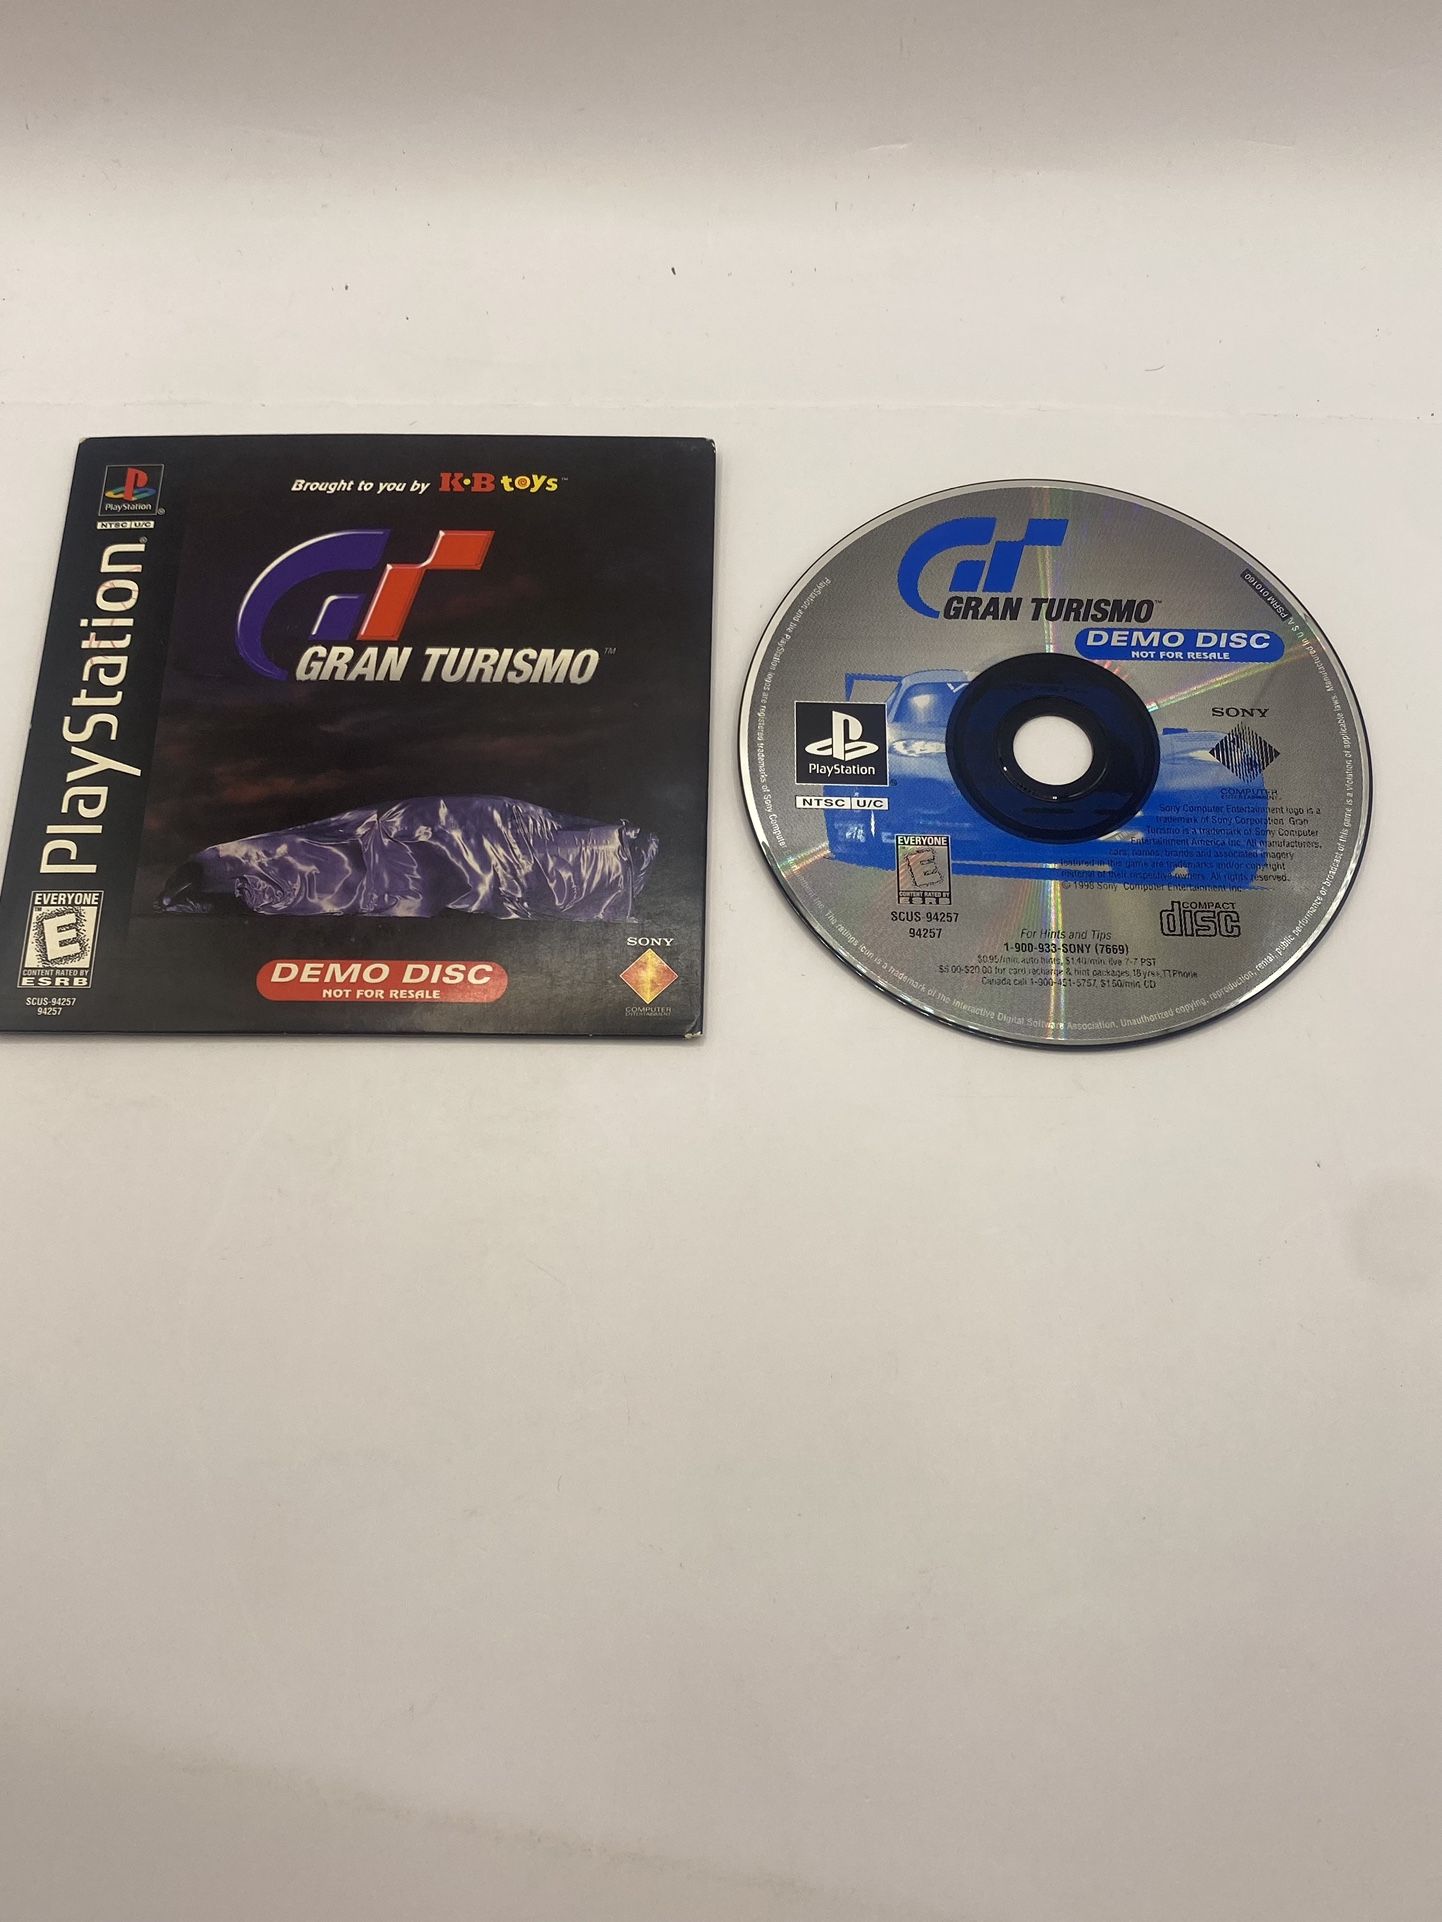 Sony Playstation 1 Gran Turismo KB Toys or Sears Demo Disc (Not for Resale)  PS1